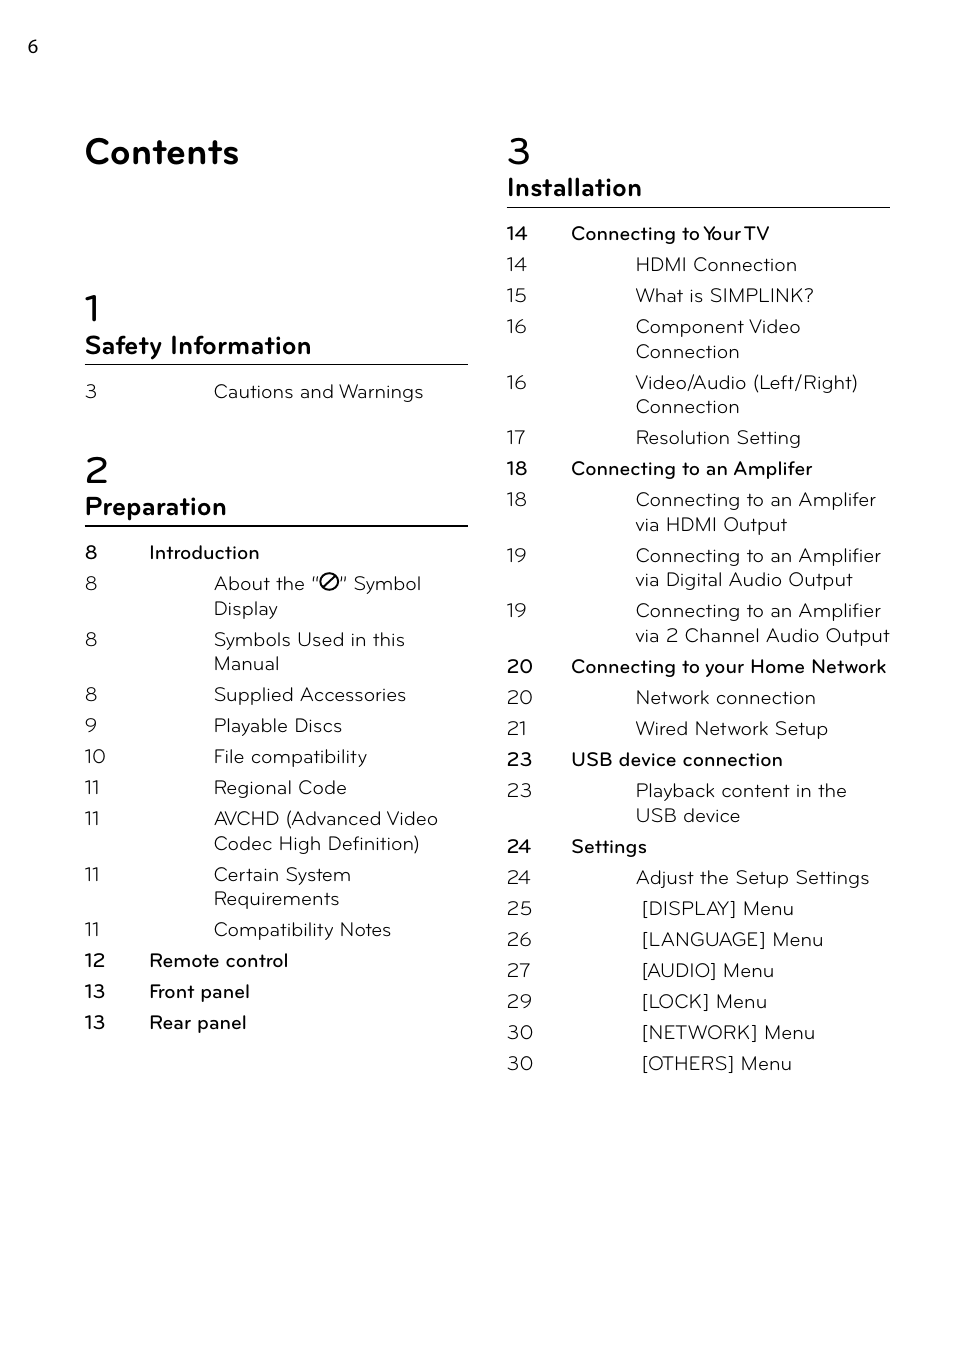 Contents 1, Safety information, Preparation | Installation | LG BD678N User Manual | Page 6 / 72